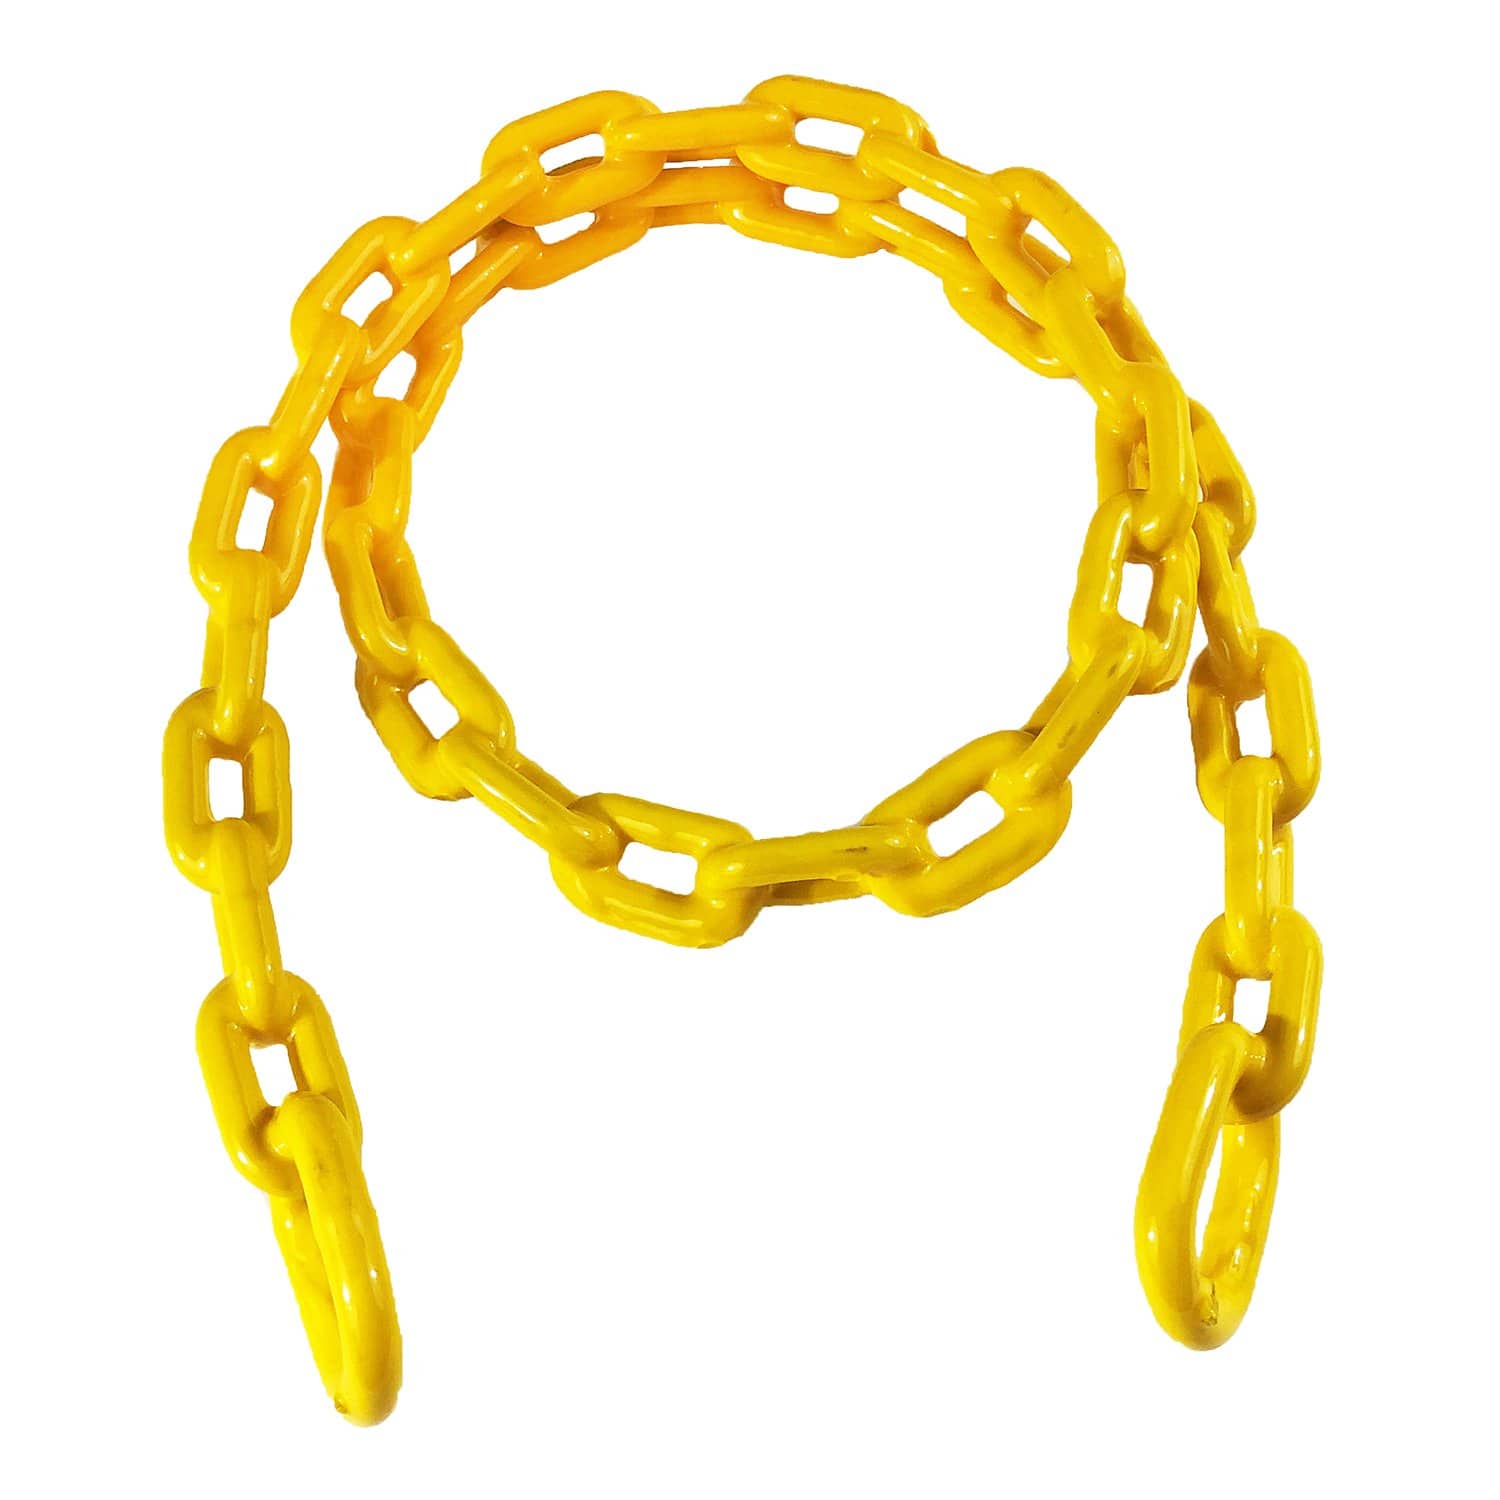 Greenfield 2115-Y Anchor Chain 1/4" X 4' Yellow